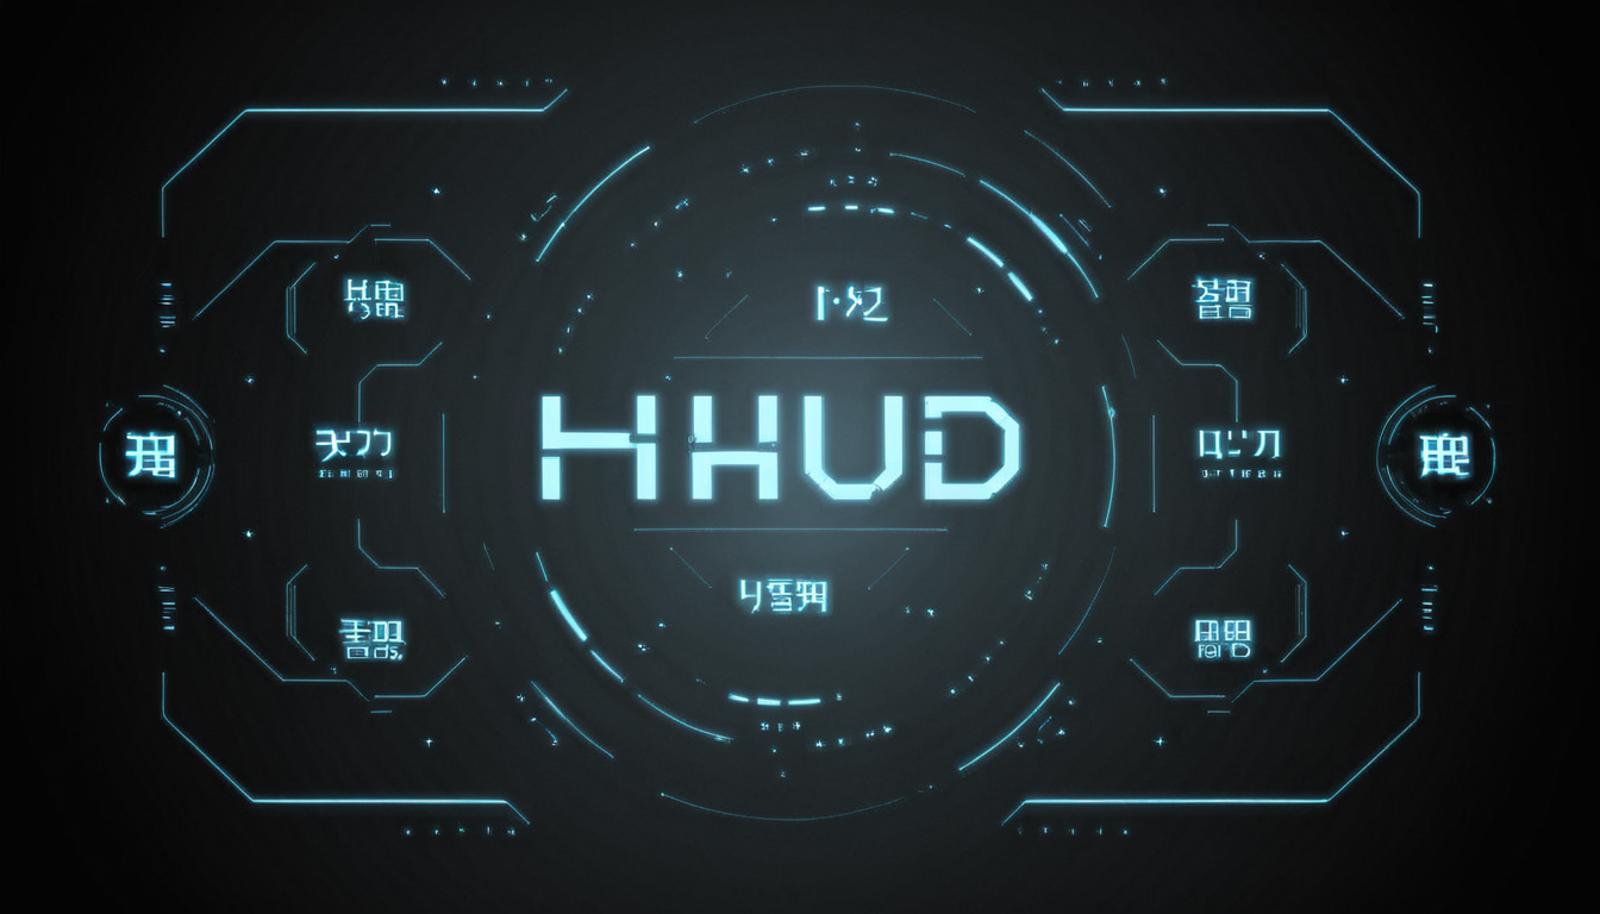 HUD image by Morpheus09